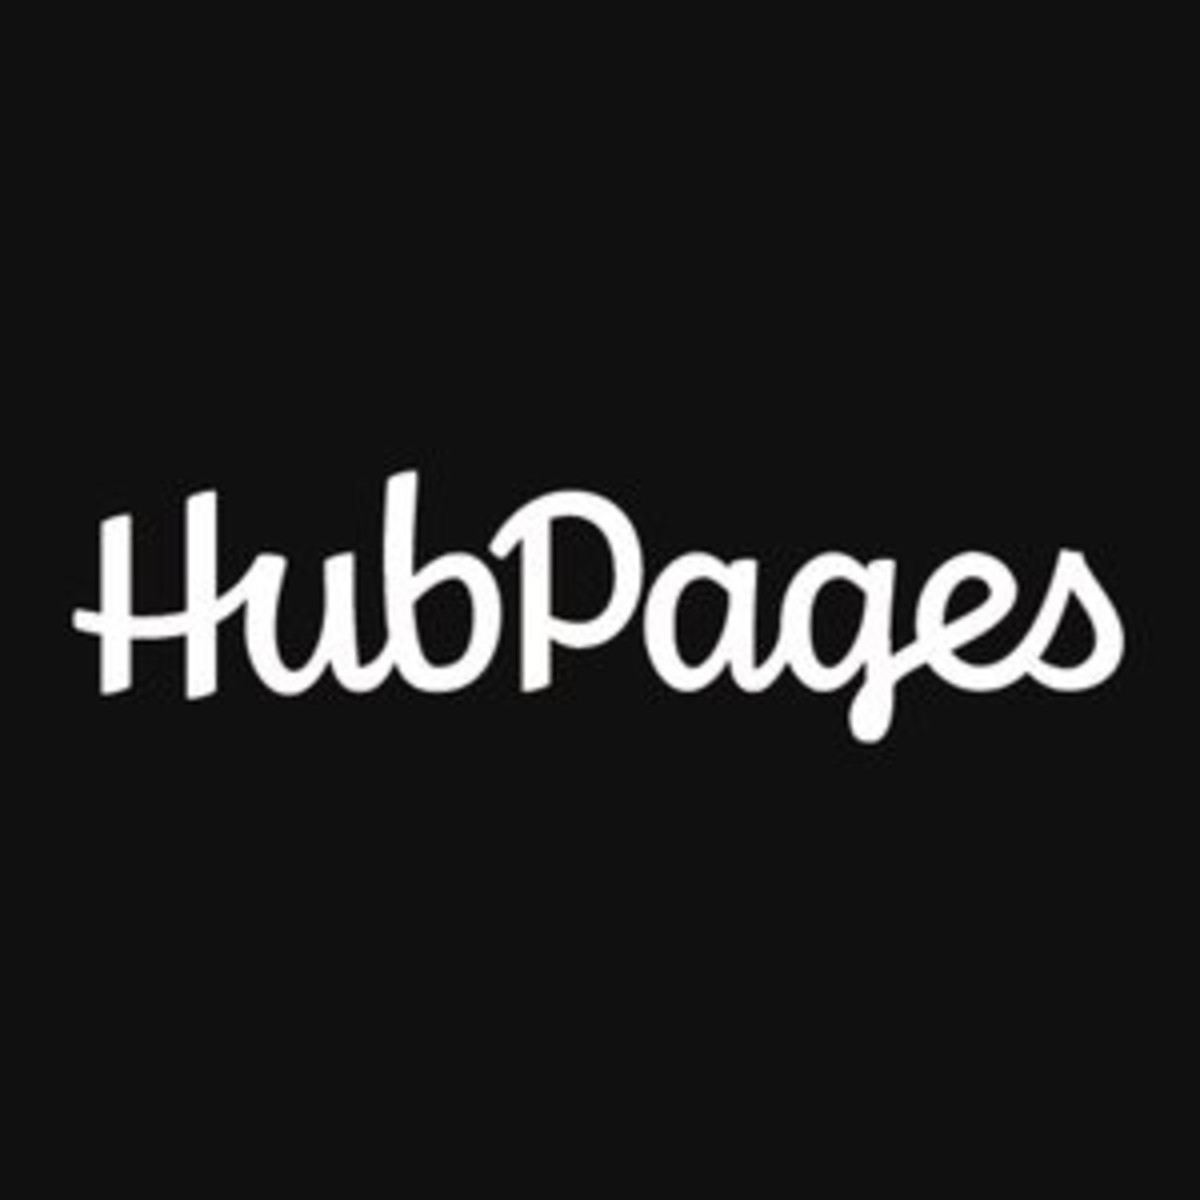 if-you-like-to-write-signup-for-a-hubpages-account-and-make-money-too